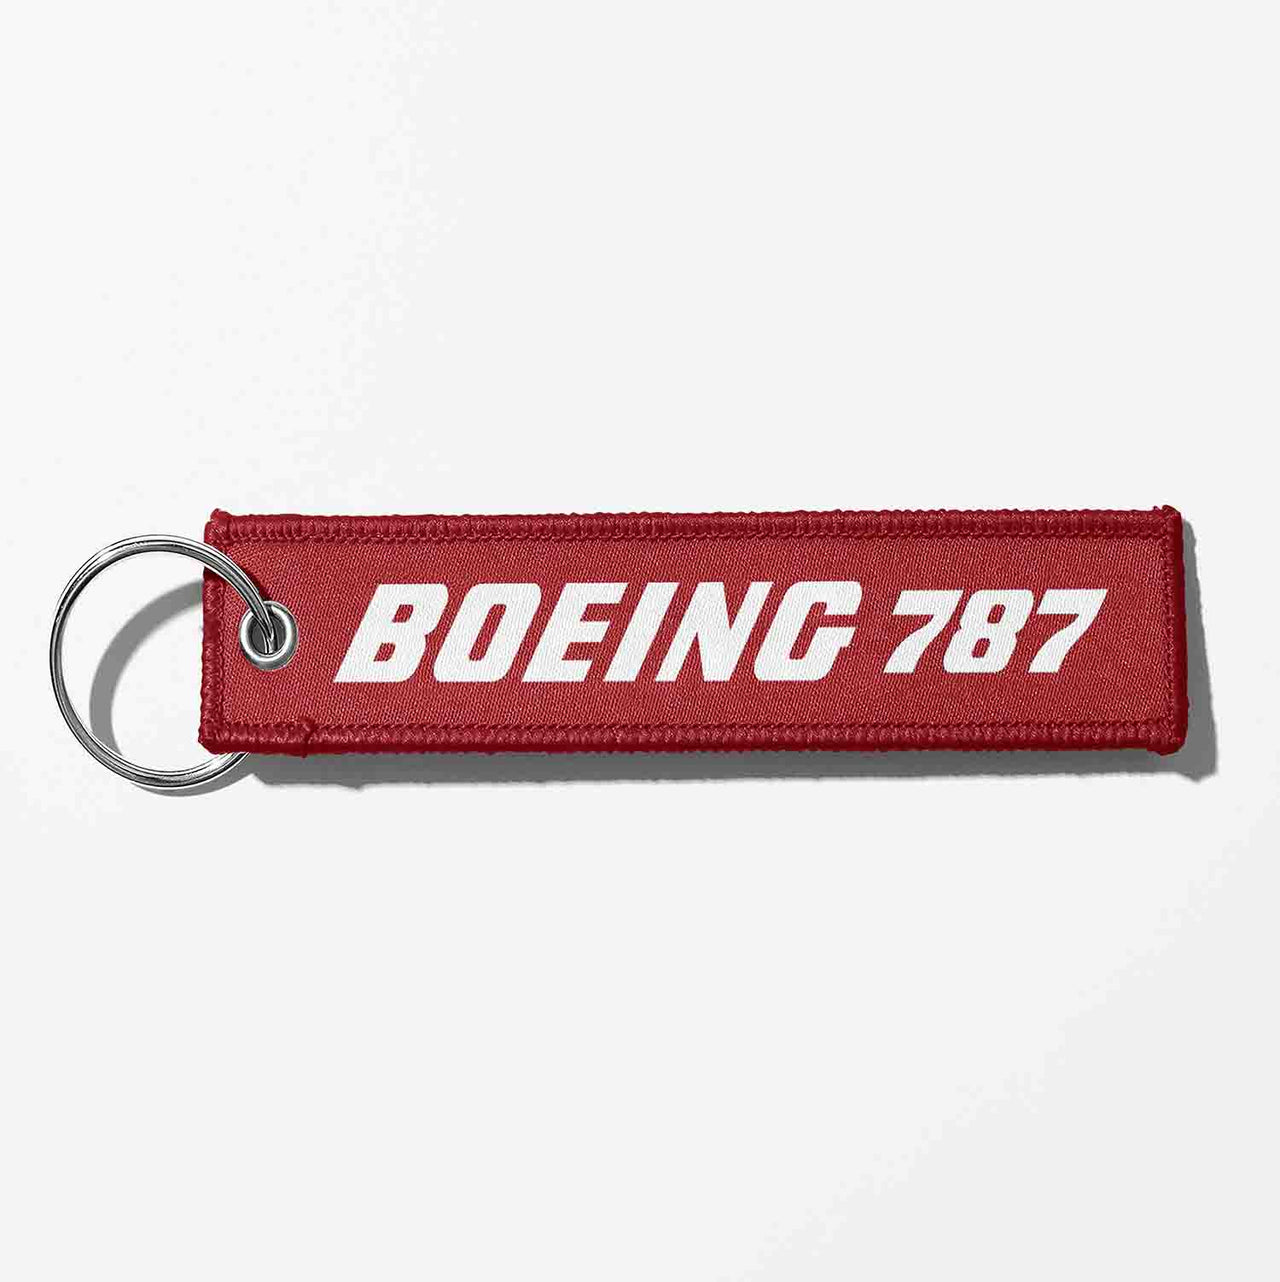 Boeing 787 & Text Designed Key Chains